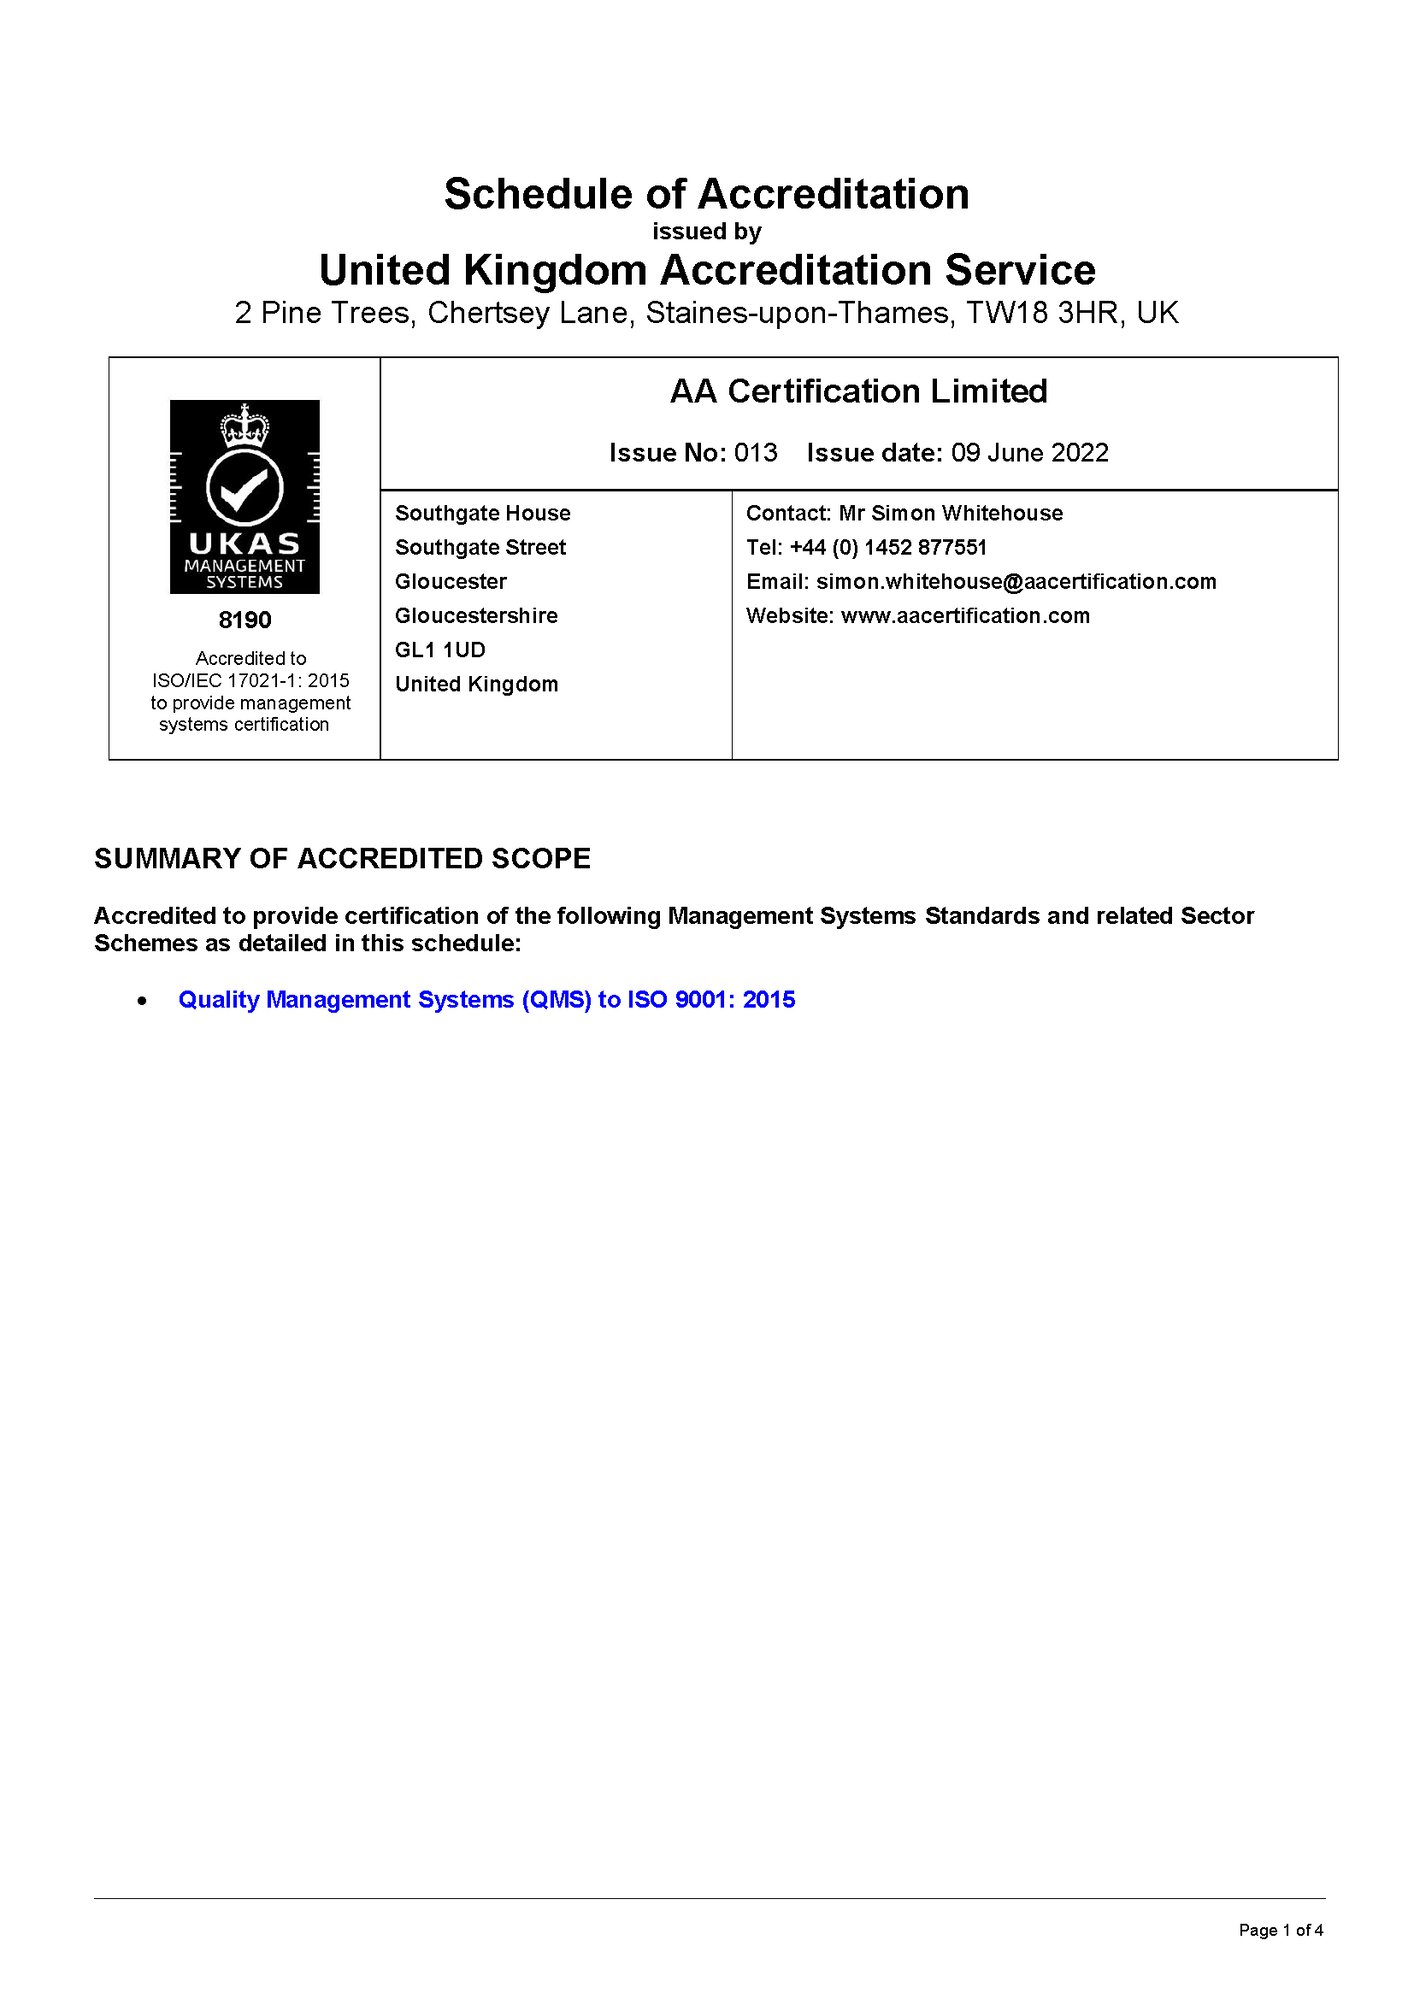 AA Certification - Scope of Accreditation 8190